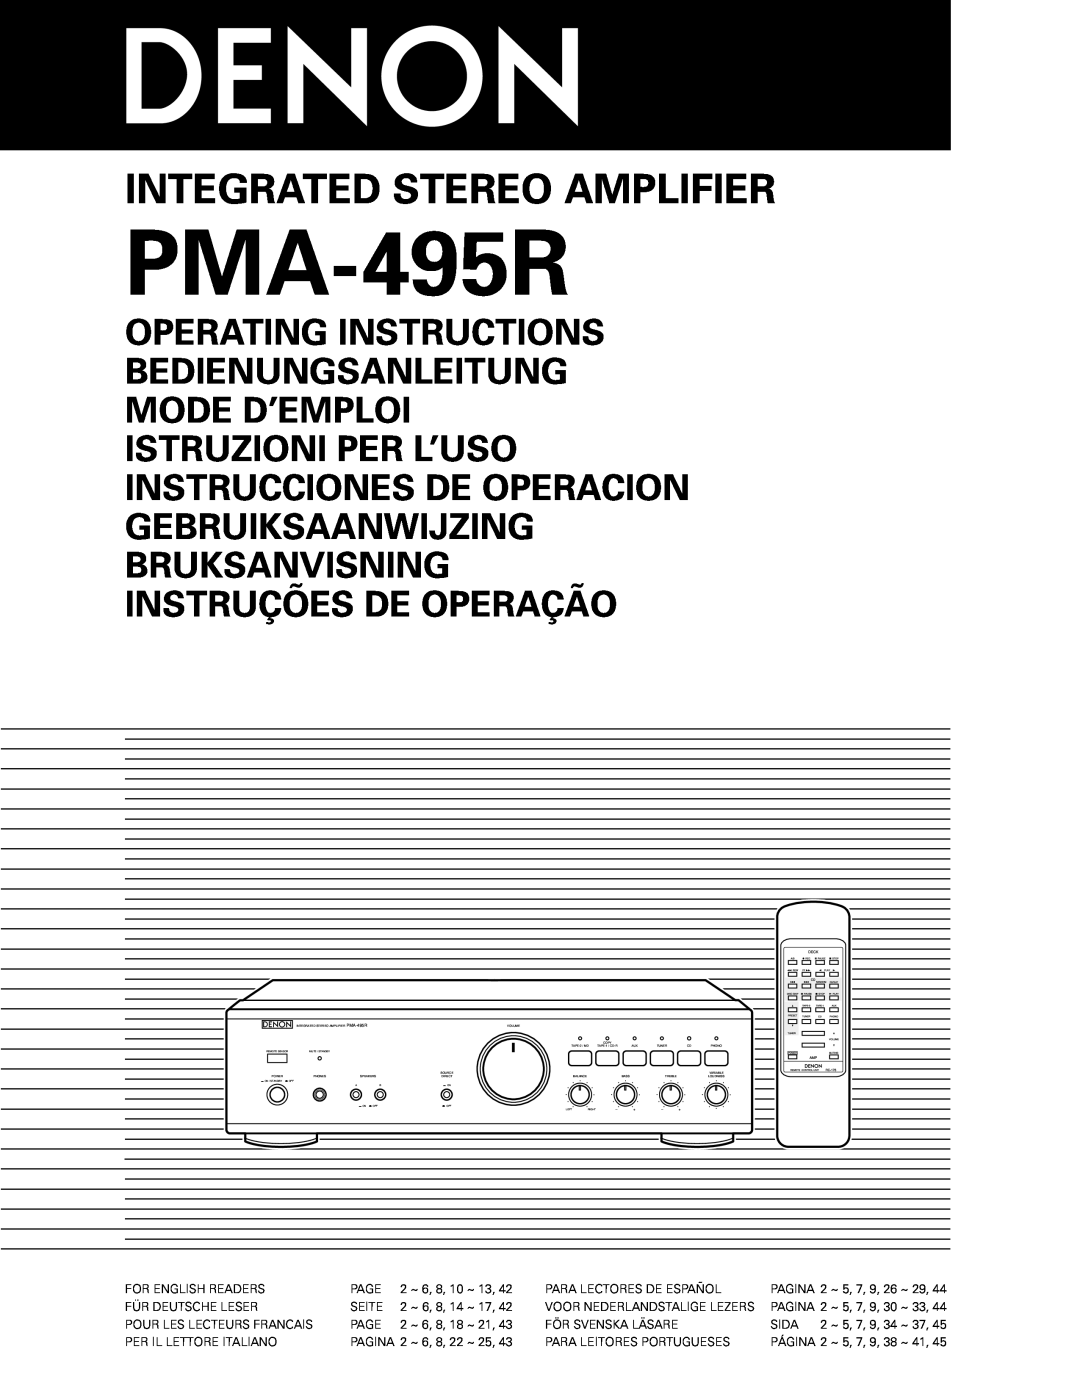 Denon PMA-495R manual Integrated Stereo Amplifier, Operating Instructions Bedienungsanleitung Mode D’Emploi 